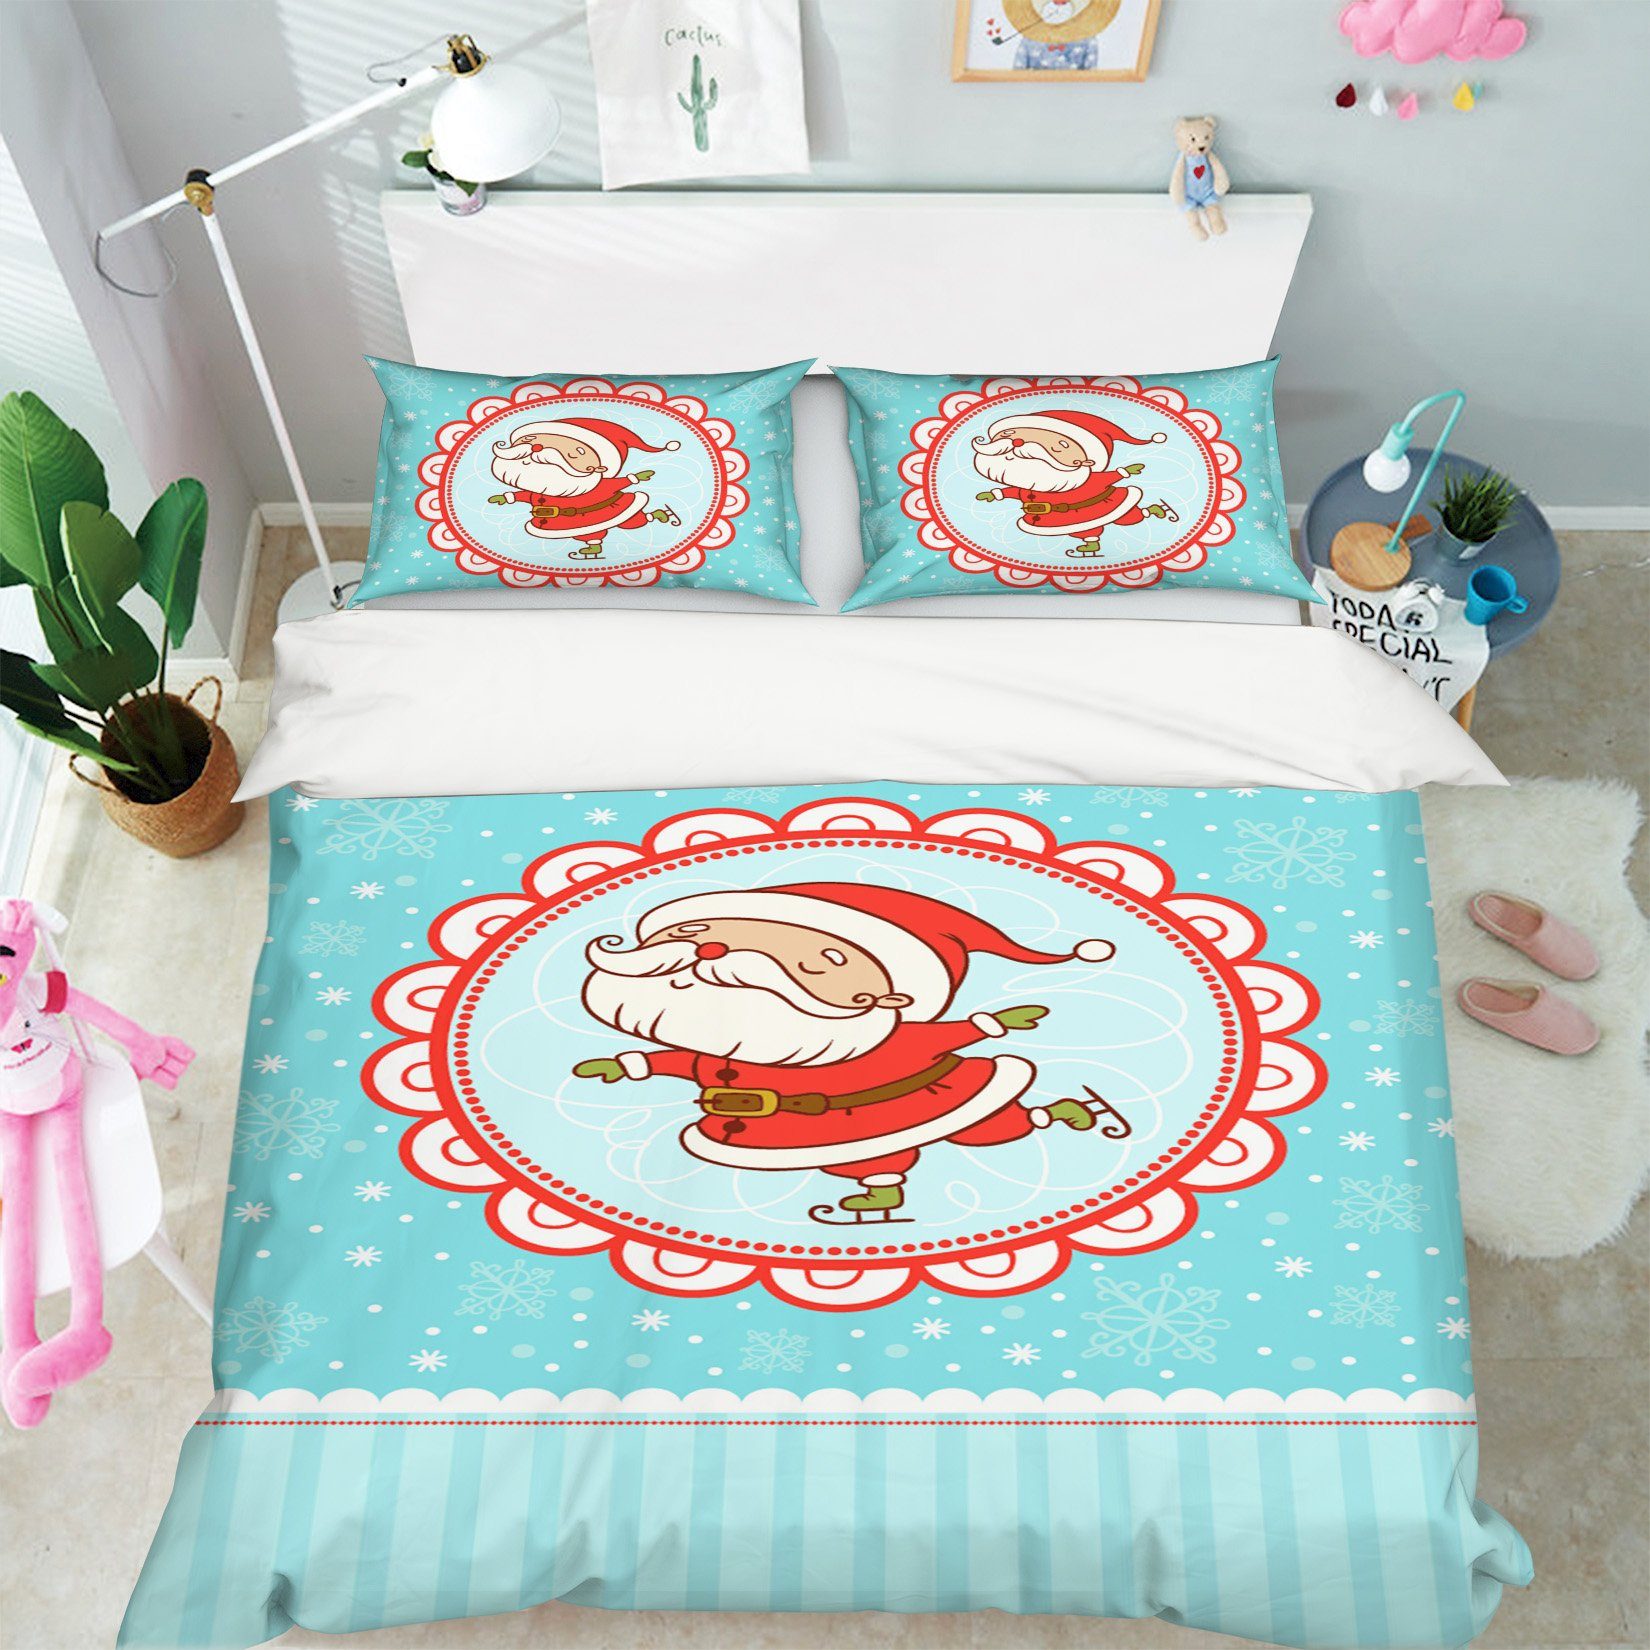 3D Christmas Lace White Beard 33 Bed Pillowcases Quilt Quiet Covers AJ Creativity Home 